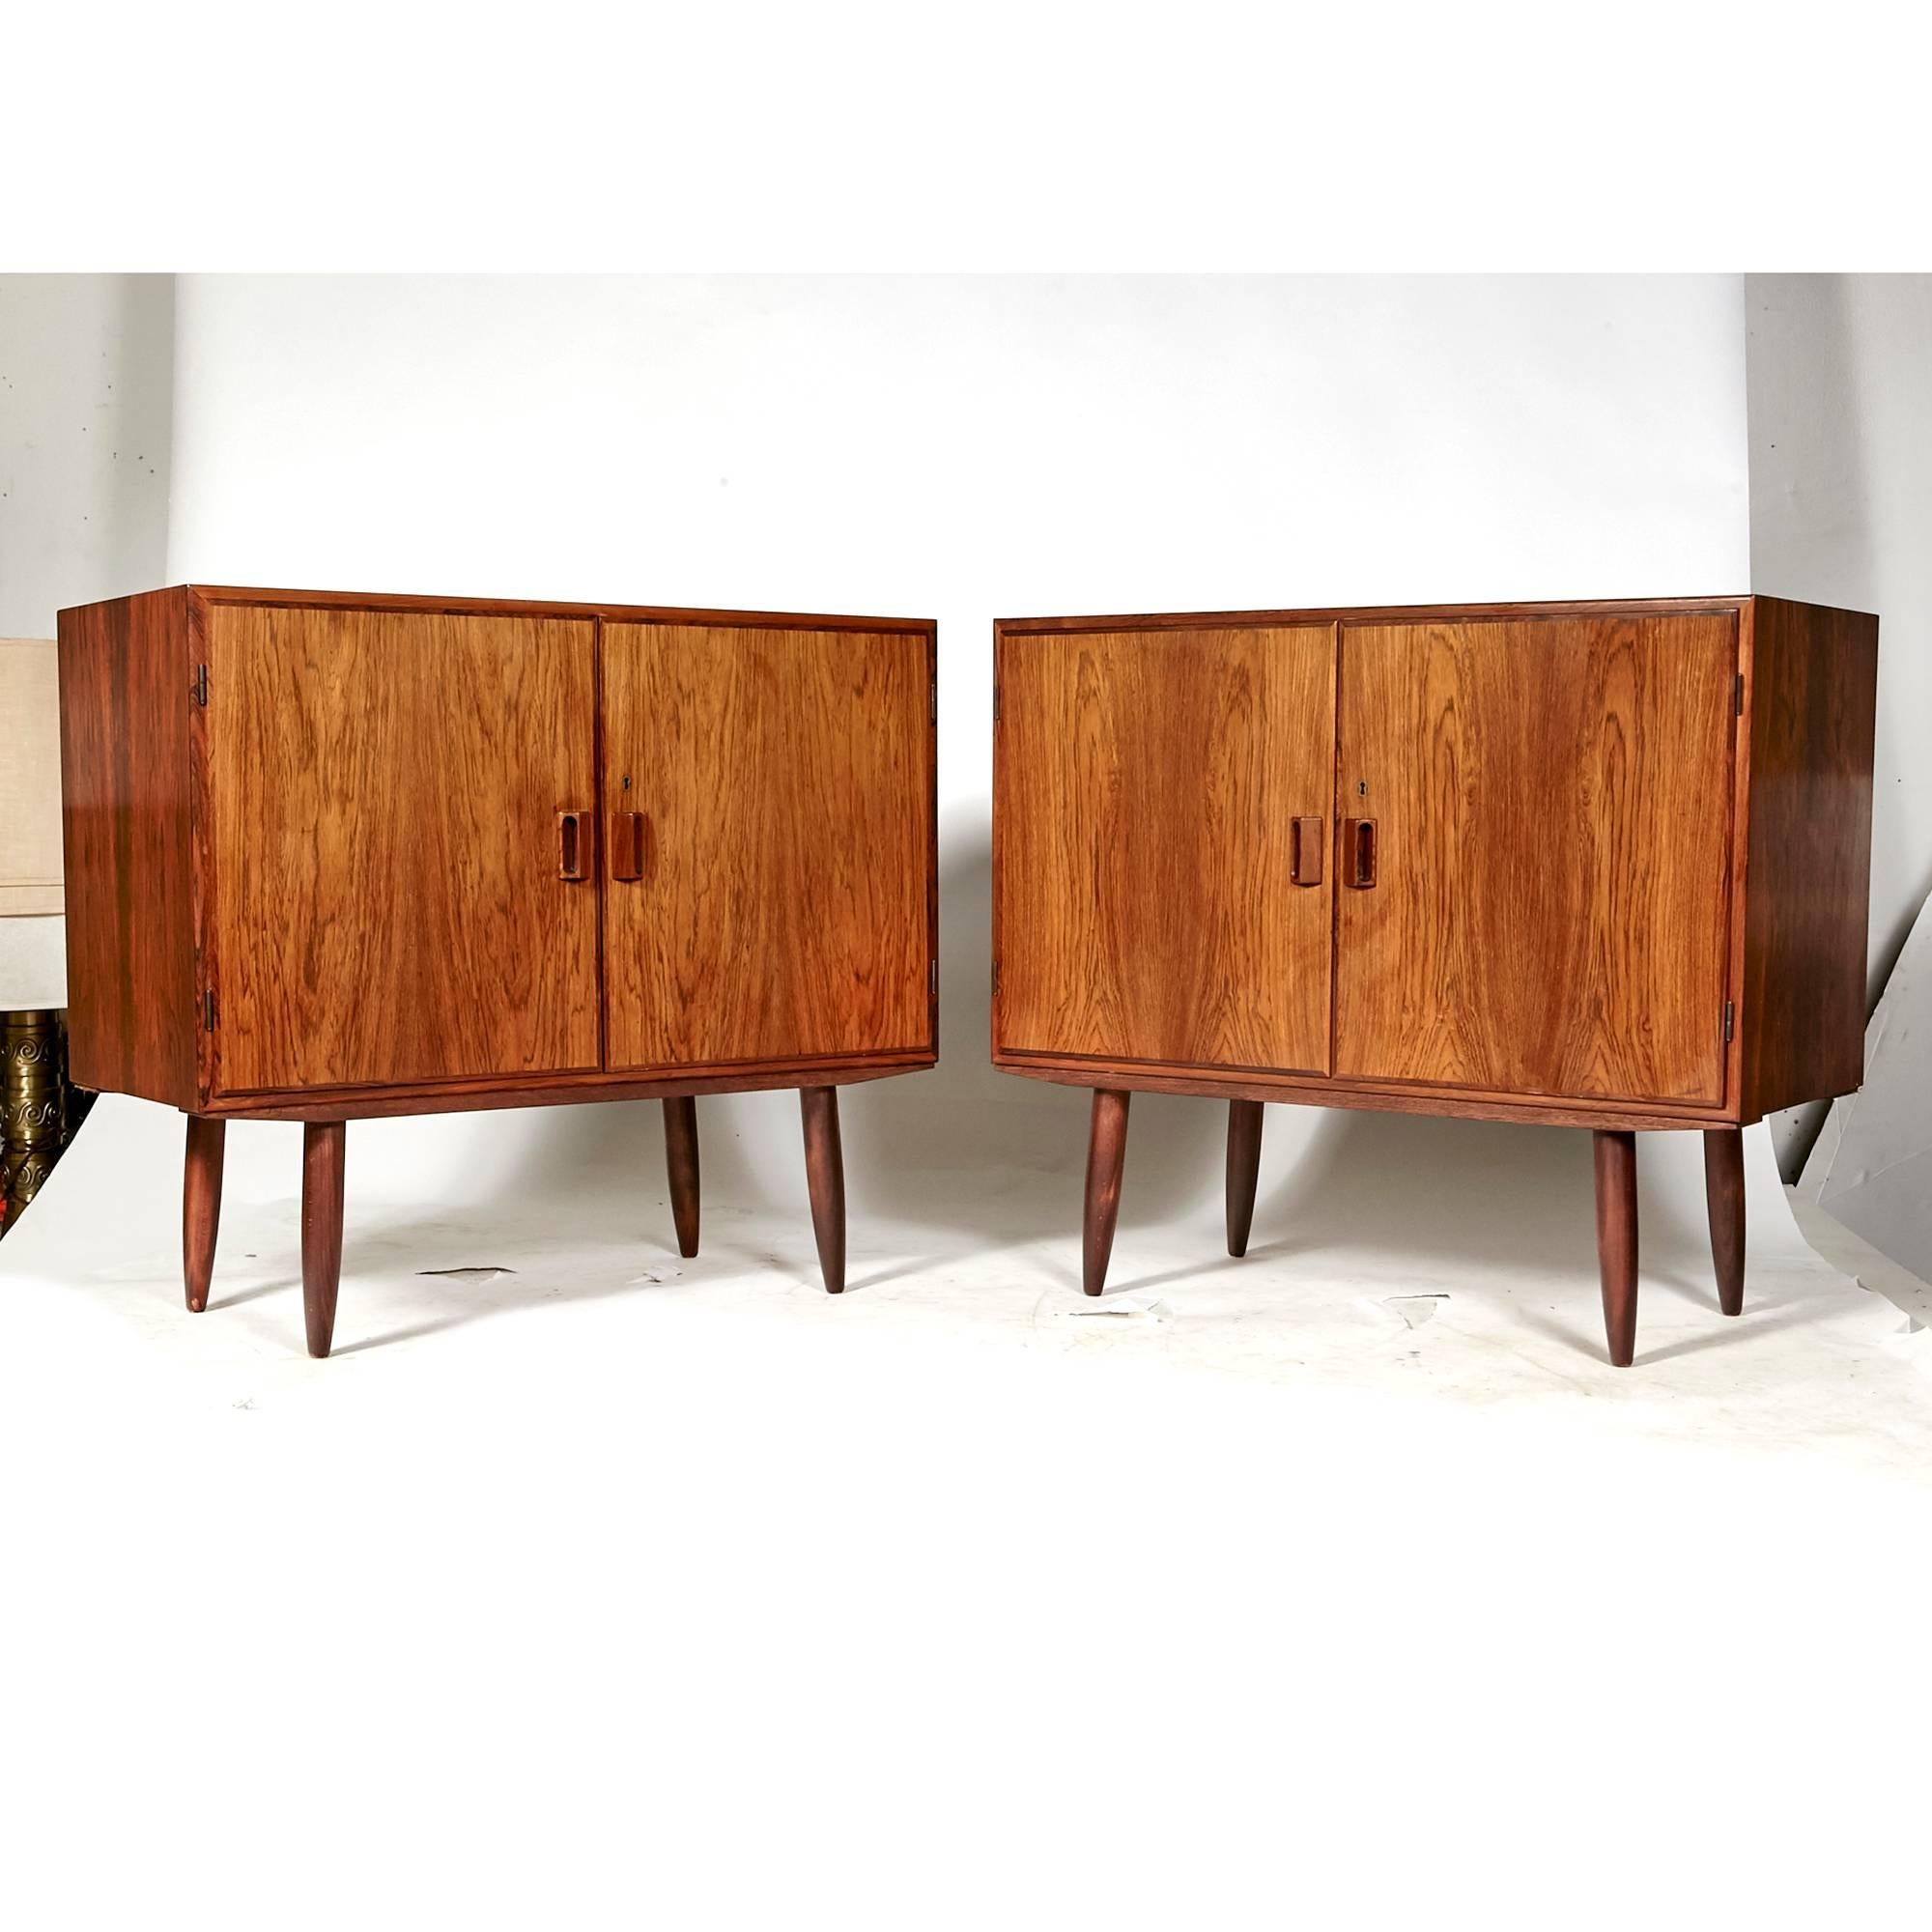 Vintage Scandinavian Modern pair of Danish Borge Mogensen for Povl Dinesen rosewood storage cabinets, circa 1960s. Inside the cabinets are shelving for storage in birchwood. Marked.